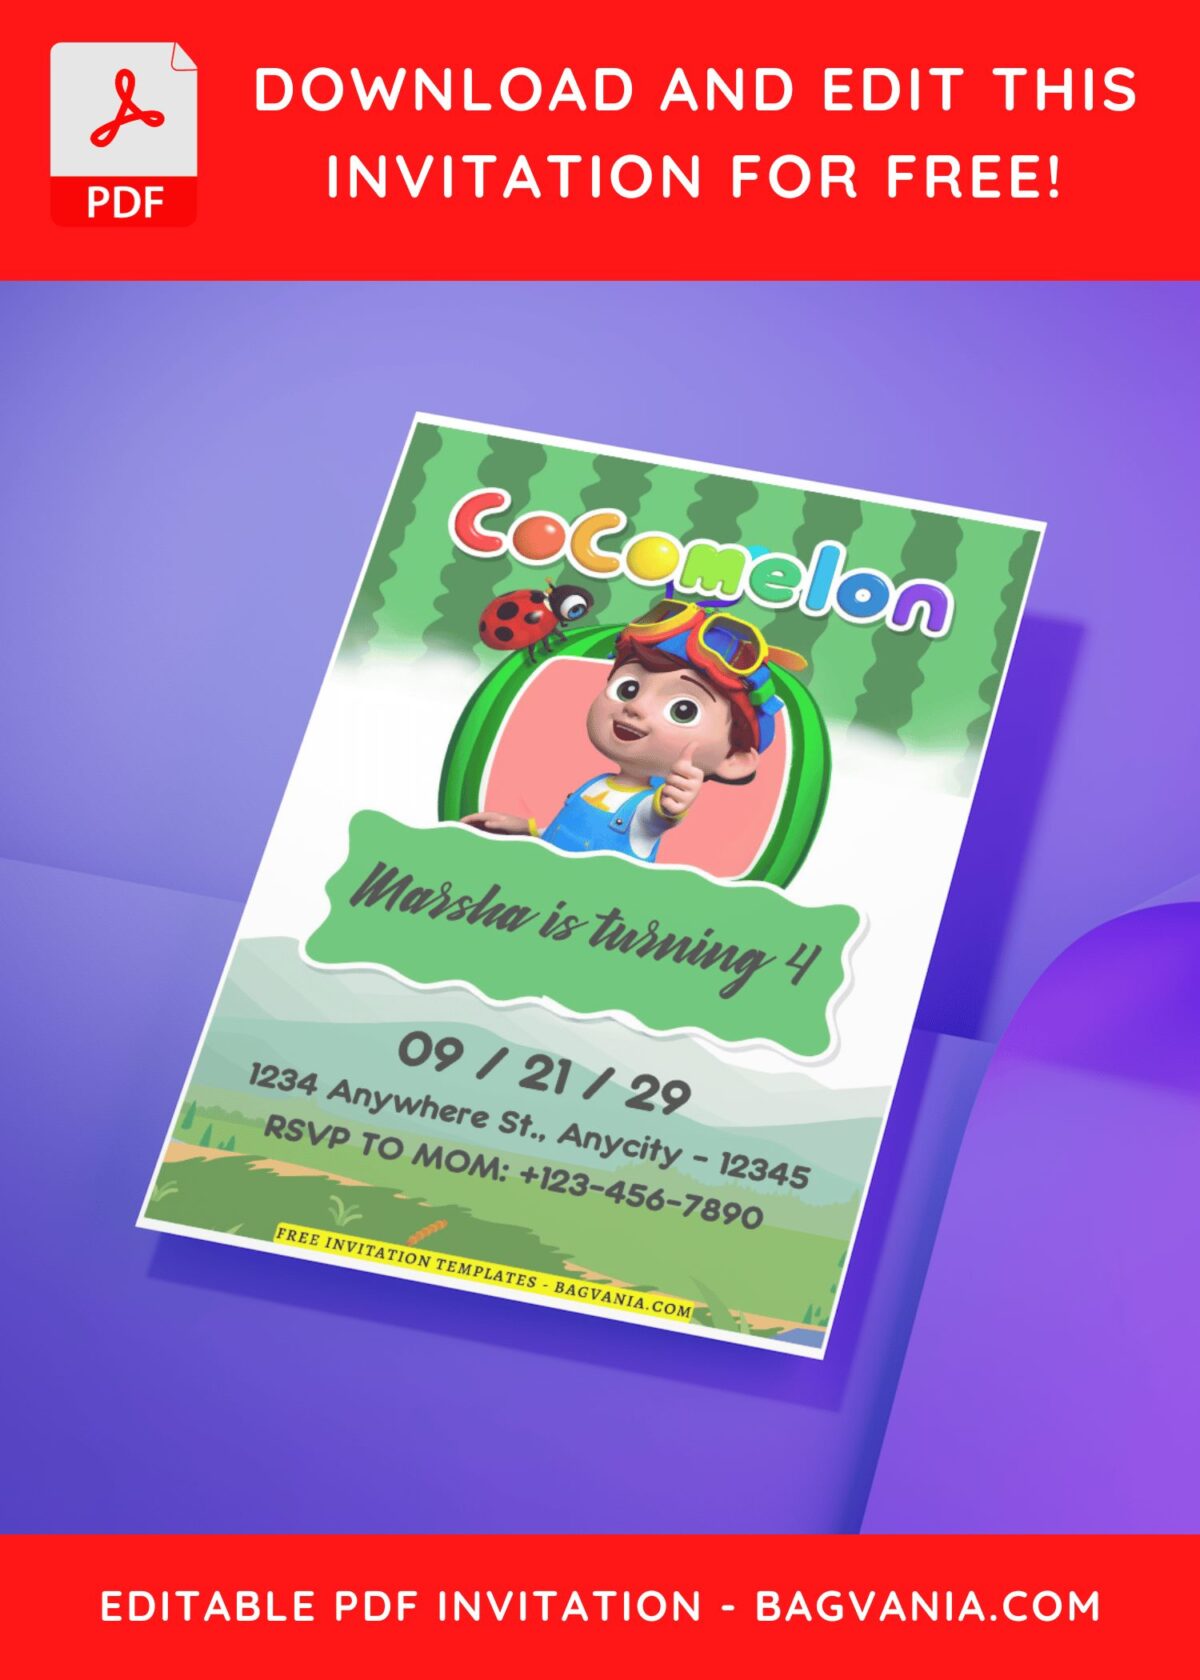 Cocomelon Invitation Templates Guide: Free Designs For Your Party! G